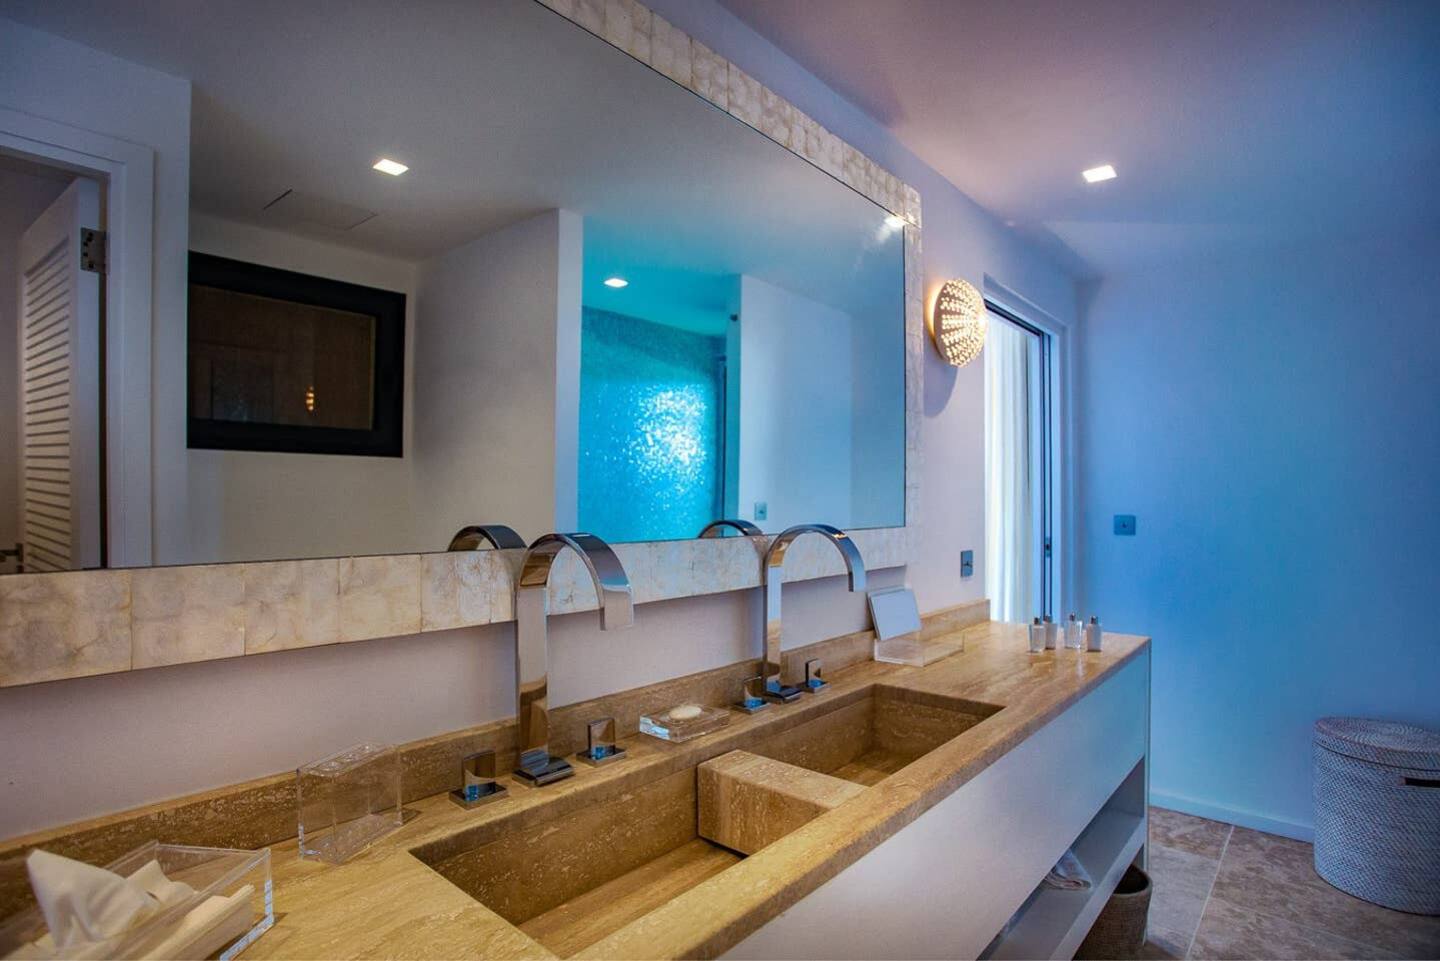 A spacious and luxurious bathroom featuring two sinks, a wide mirror, modern fixtures, and a soothing color palette.